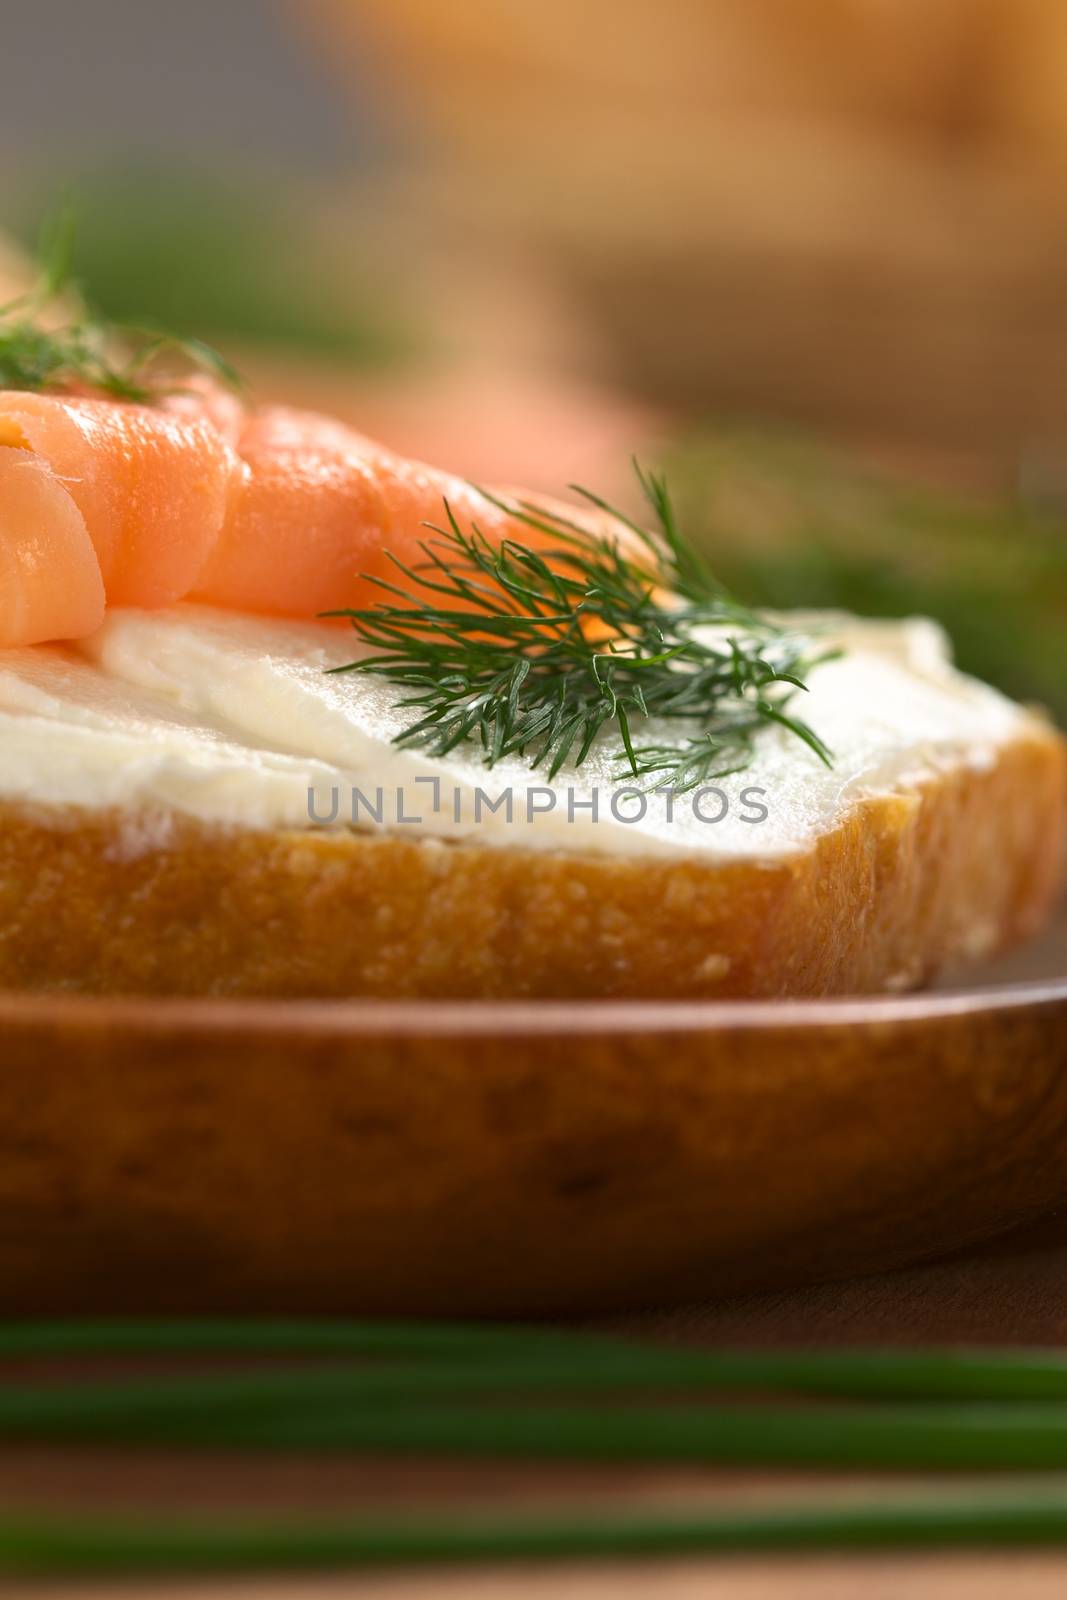 Canape of smoked salmon and cream cheese on wholewheat bun garnished with dill (Selective Focus, Focus on the front of the dill)